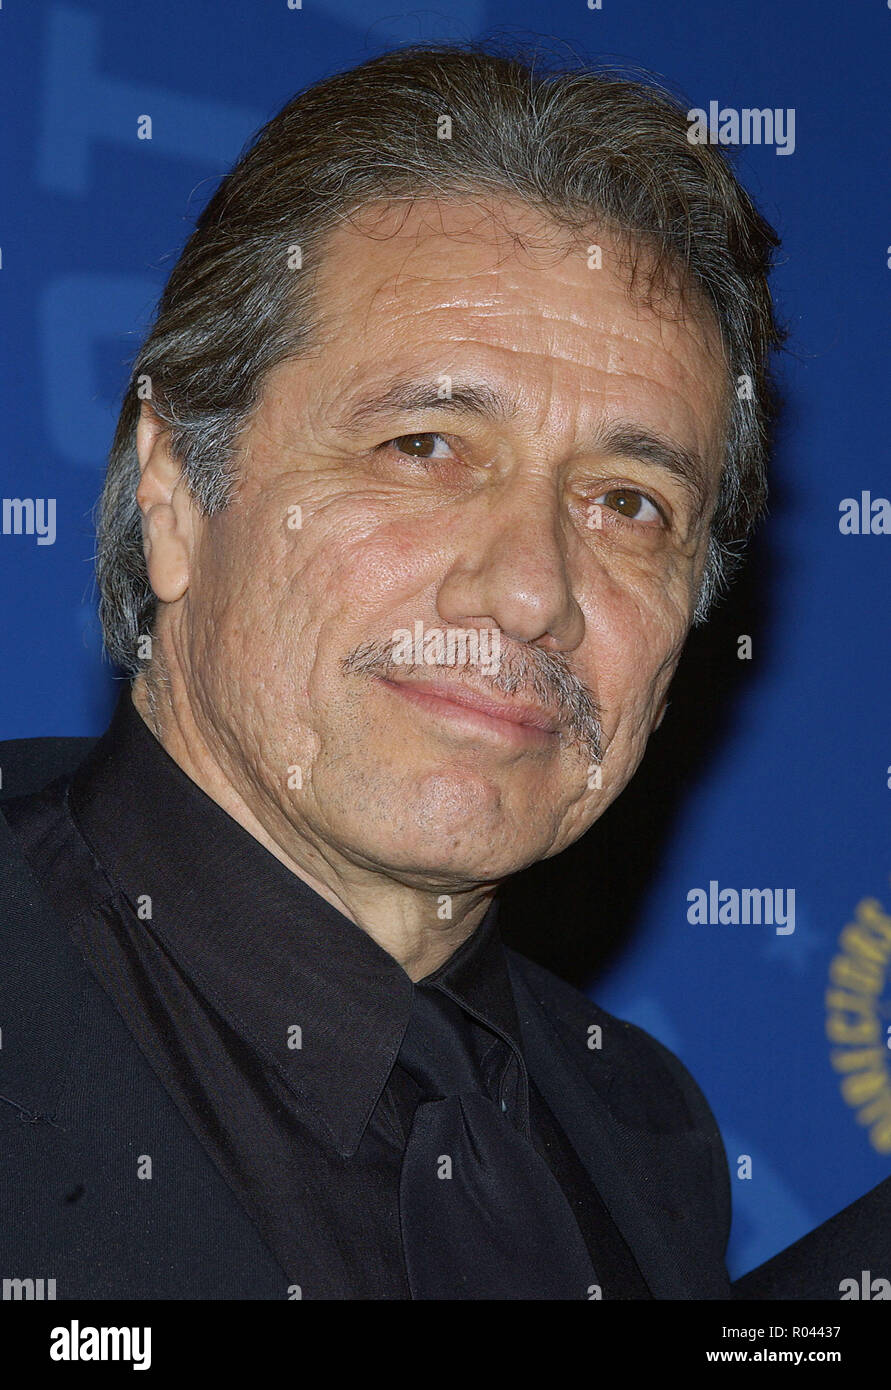 Edward James Olmos at the Director Guild Of America Awards at the Beverly Hilton In Los Angeles. January 30, 2005.OlmosEdwardJames080 Red Carpet Event, Vertical, USA, Film Industry, Celebrities,  Photography, Bestof, Arts Culture and Entertainment, Topix Celebrities fashion /  Vertical, Best of, Event in Hollywood Life - California,  Red Carpet and backstage, USA, Film Industry, Celebrities,  movie celebrities, TV celebrities, Music celebrities, Photography, Bestof, Arts Culture and Entertainment,  Topix, headshot, vertical, one person,, from the year , 2005, inquiry tsuni@Gamma-USA.com Stock Photo